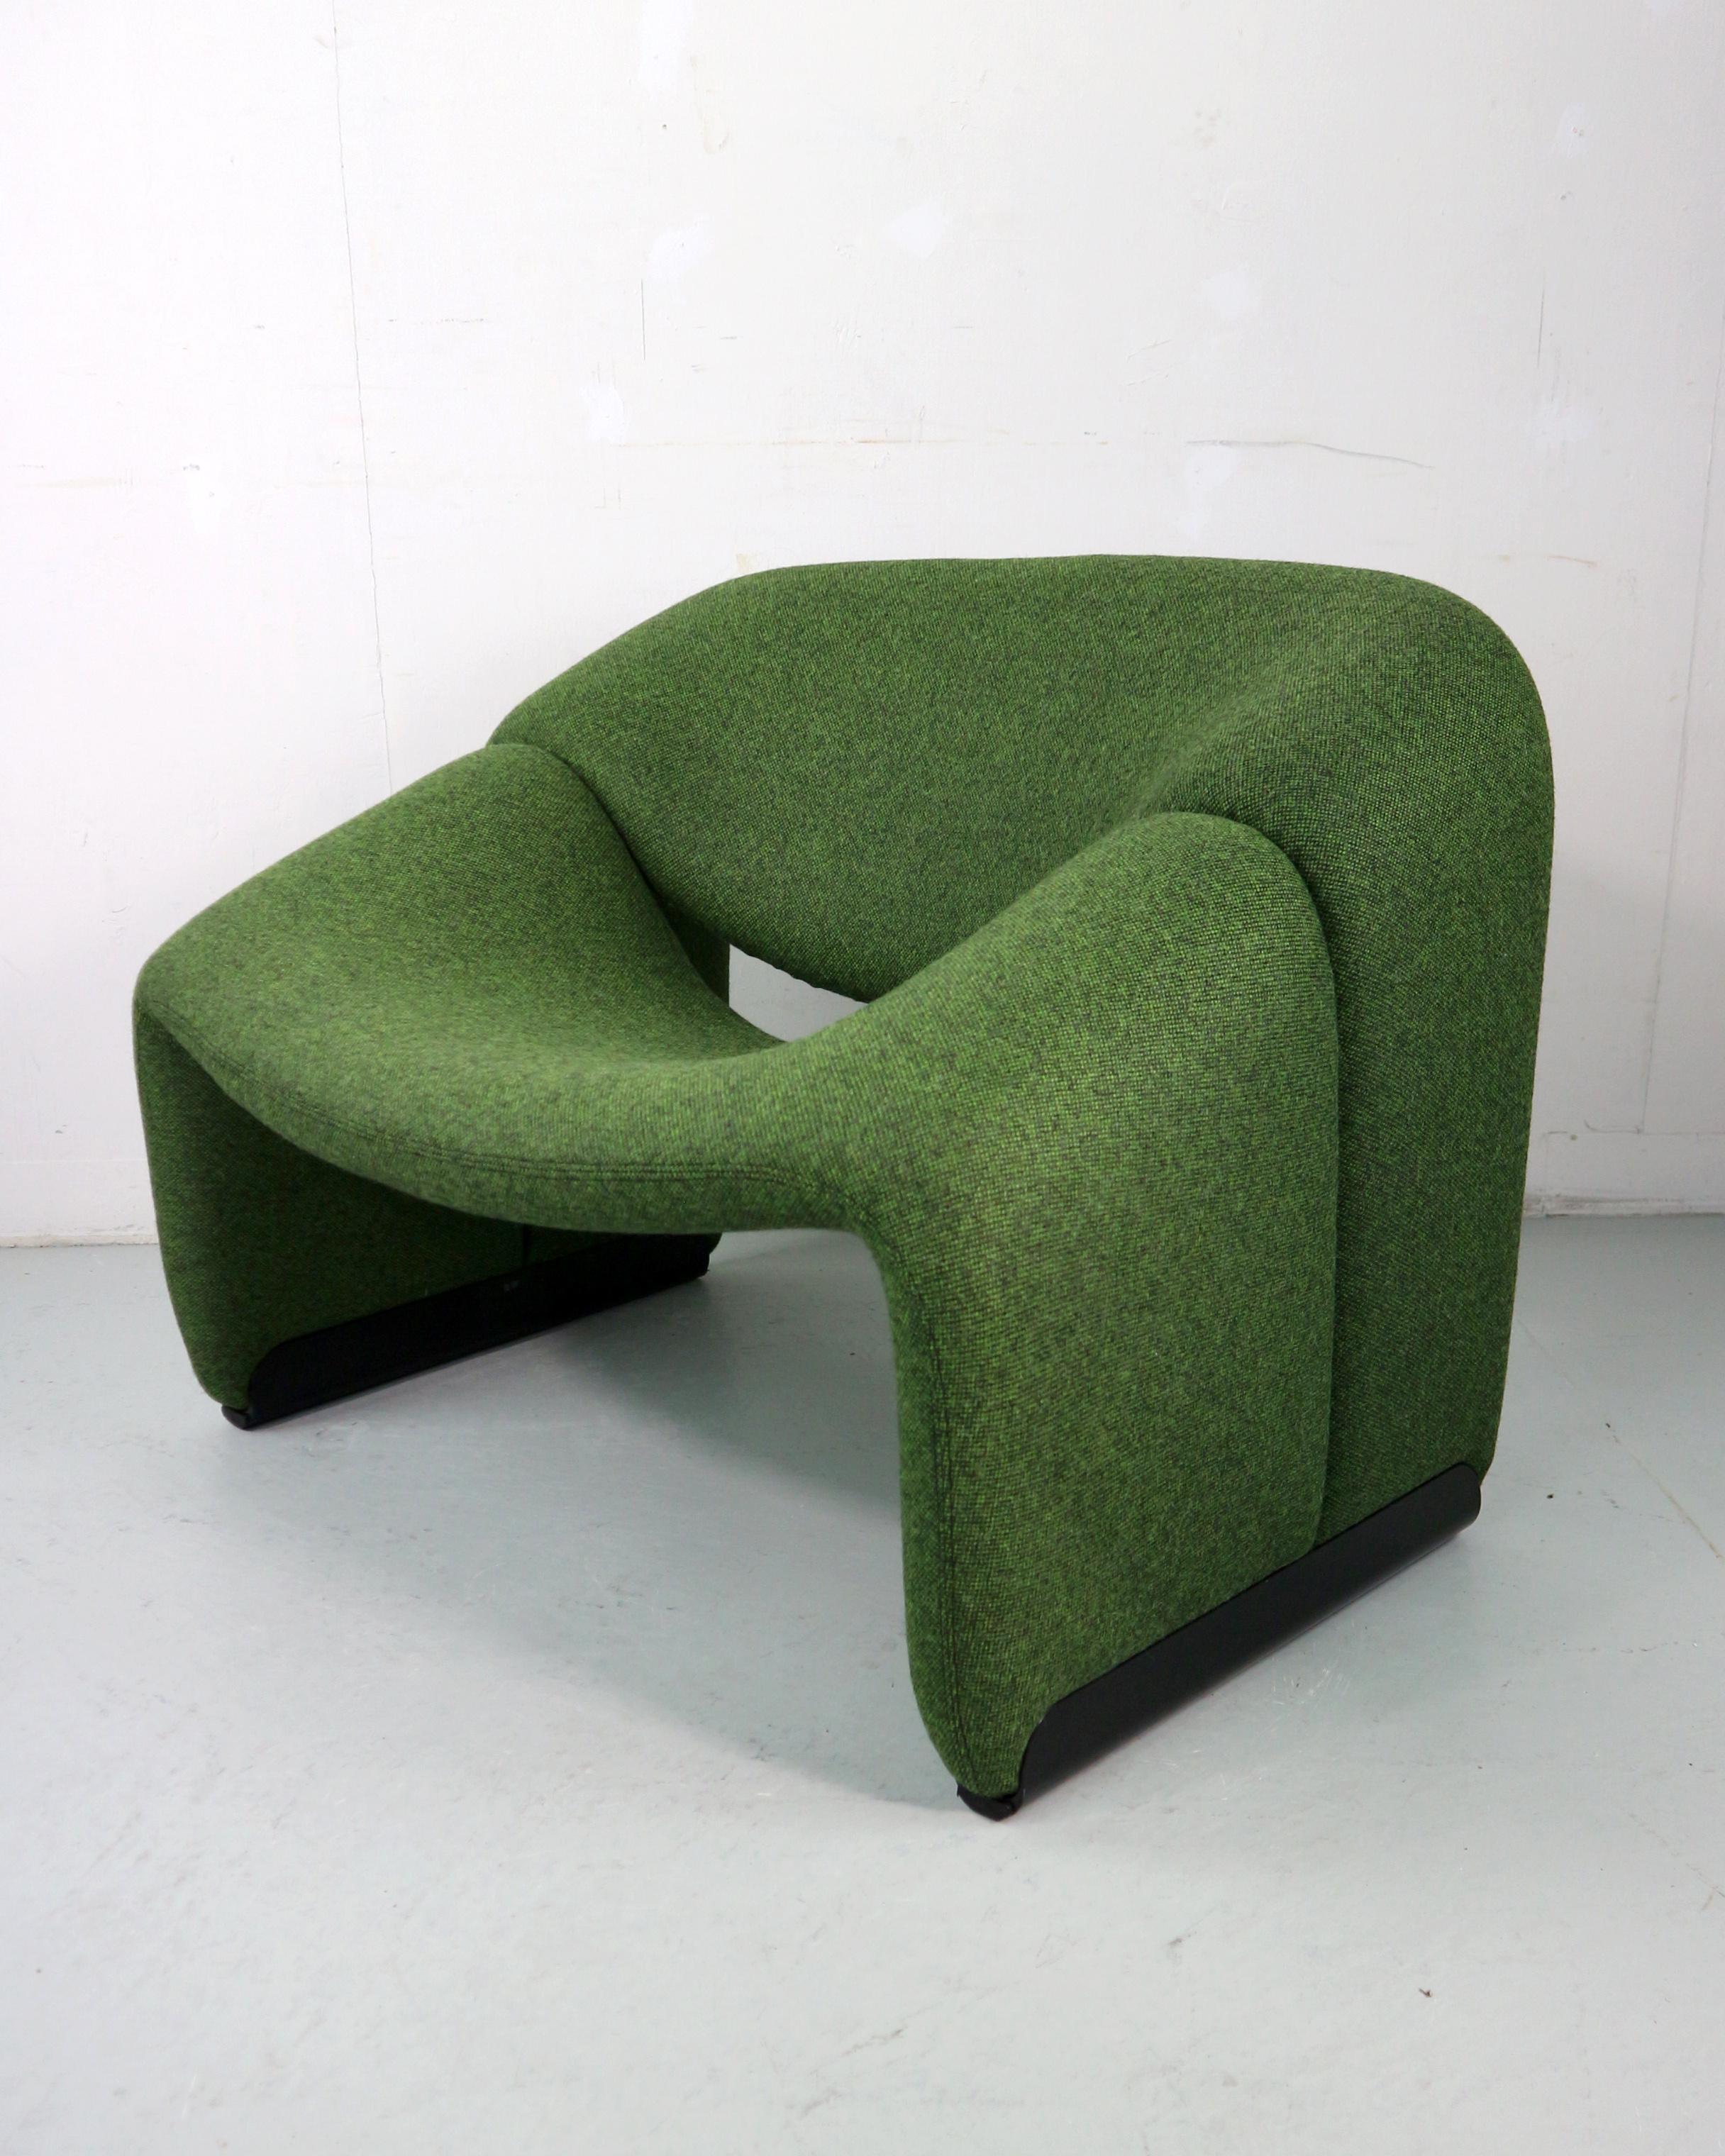 Groovy lounge chair designed by Pierre Paulin in 1972 and manufactured for Artifort, Holland.
Model No: F598, or also known as 